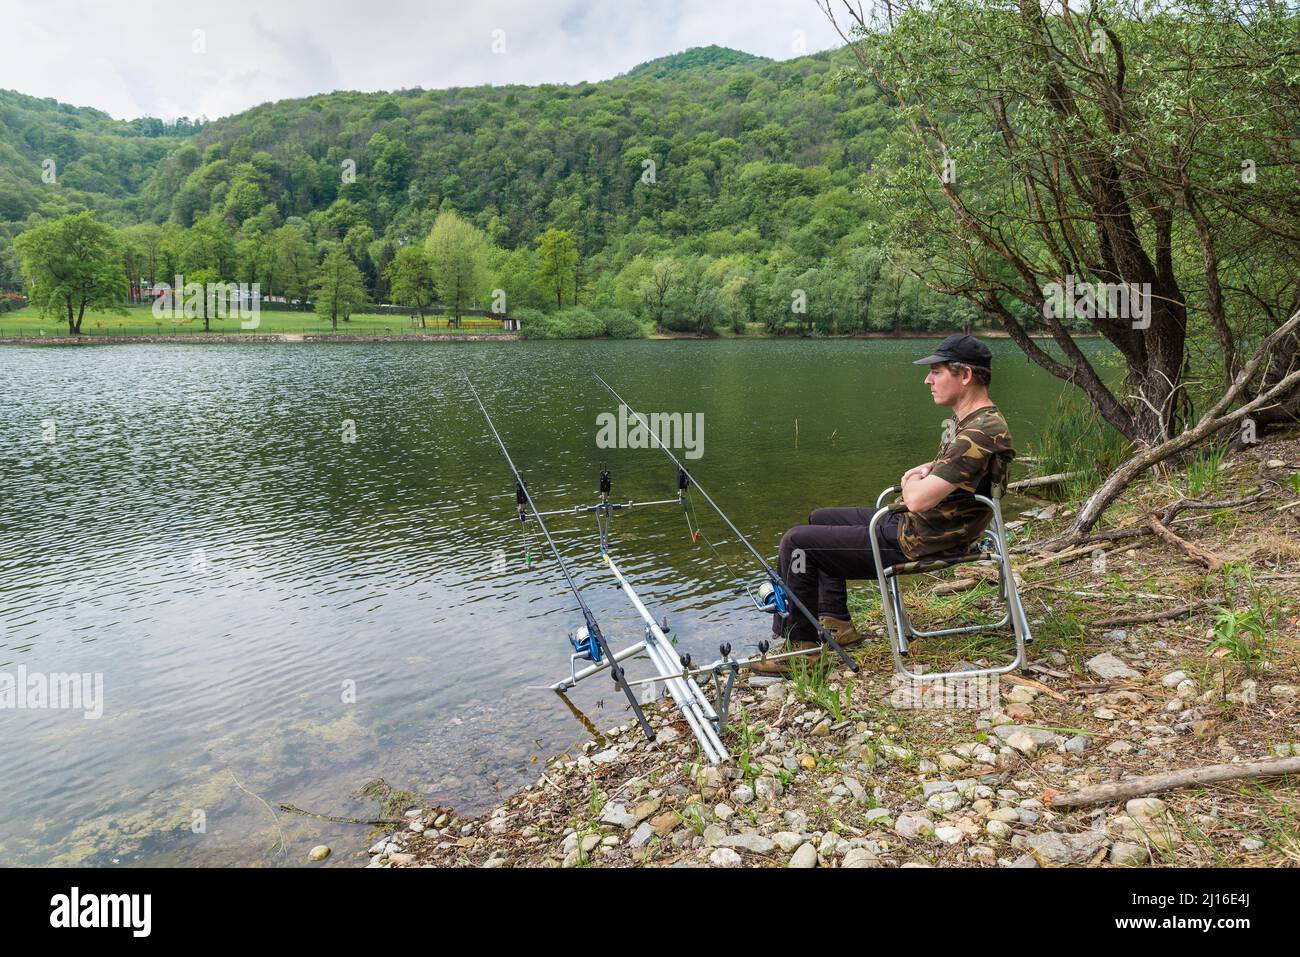 Fishing adventures, carp fishing. Man rests waiting to catch a fish with the carpfishing technique Stock Photo